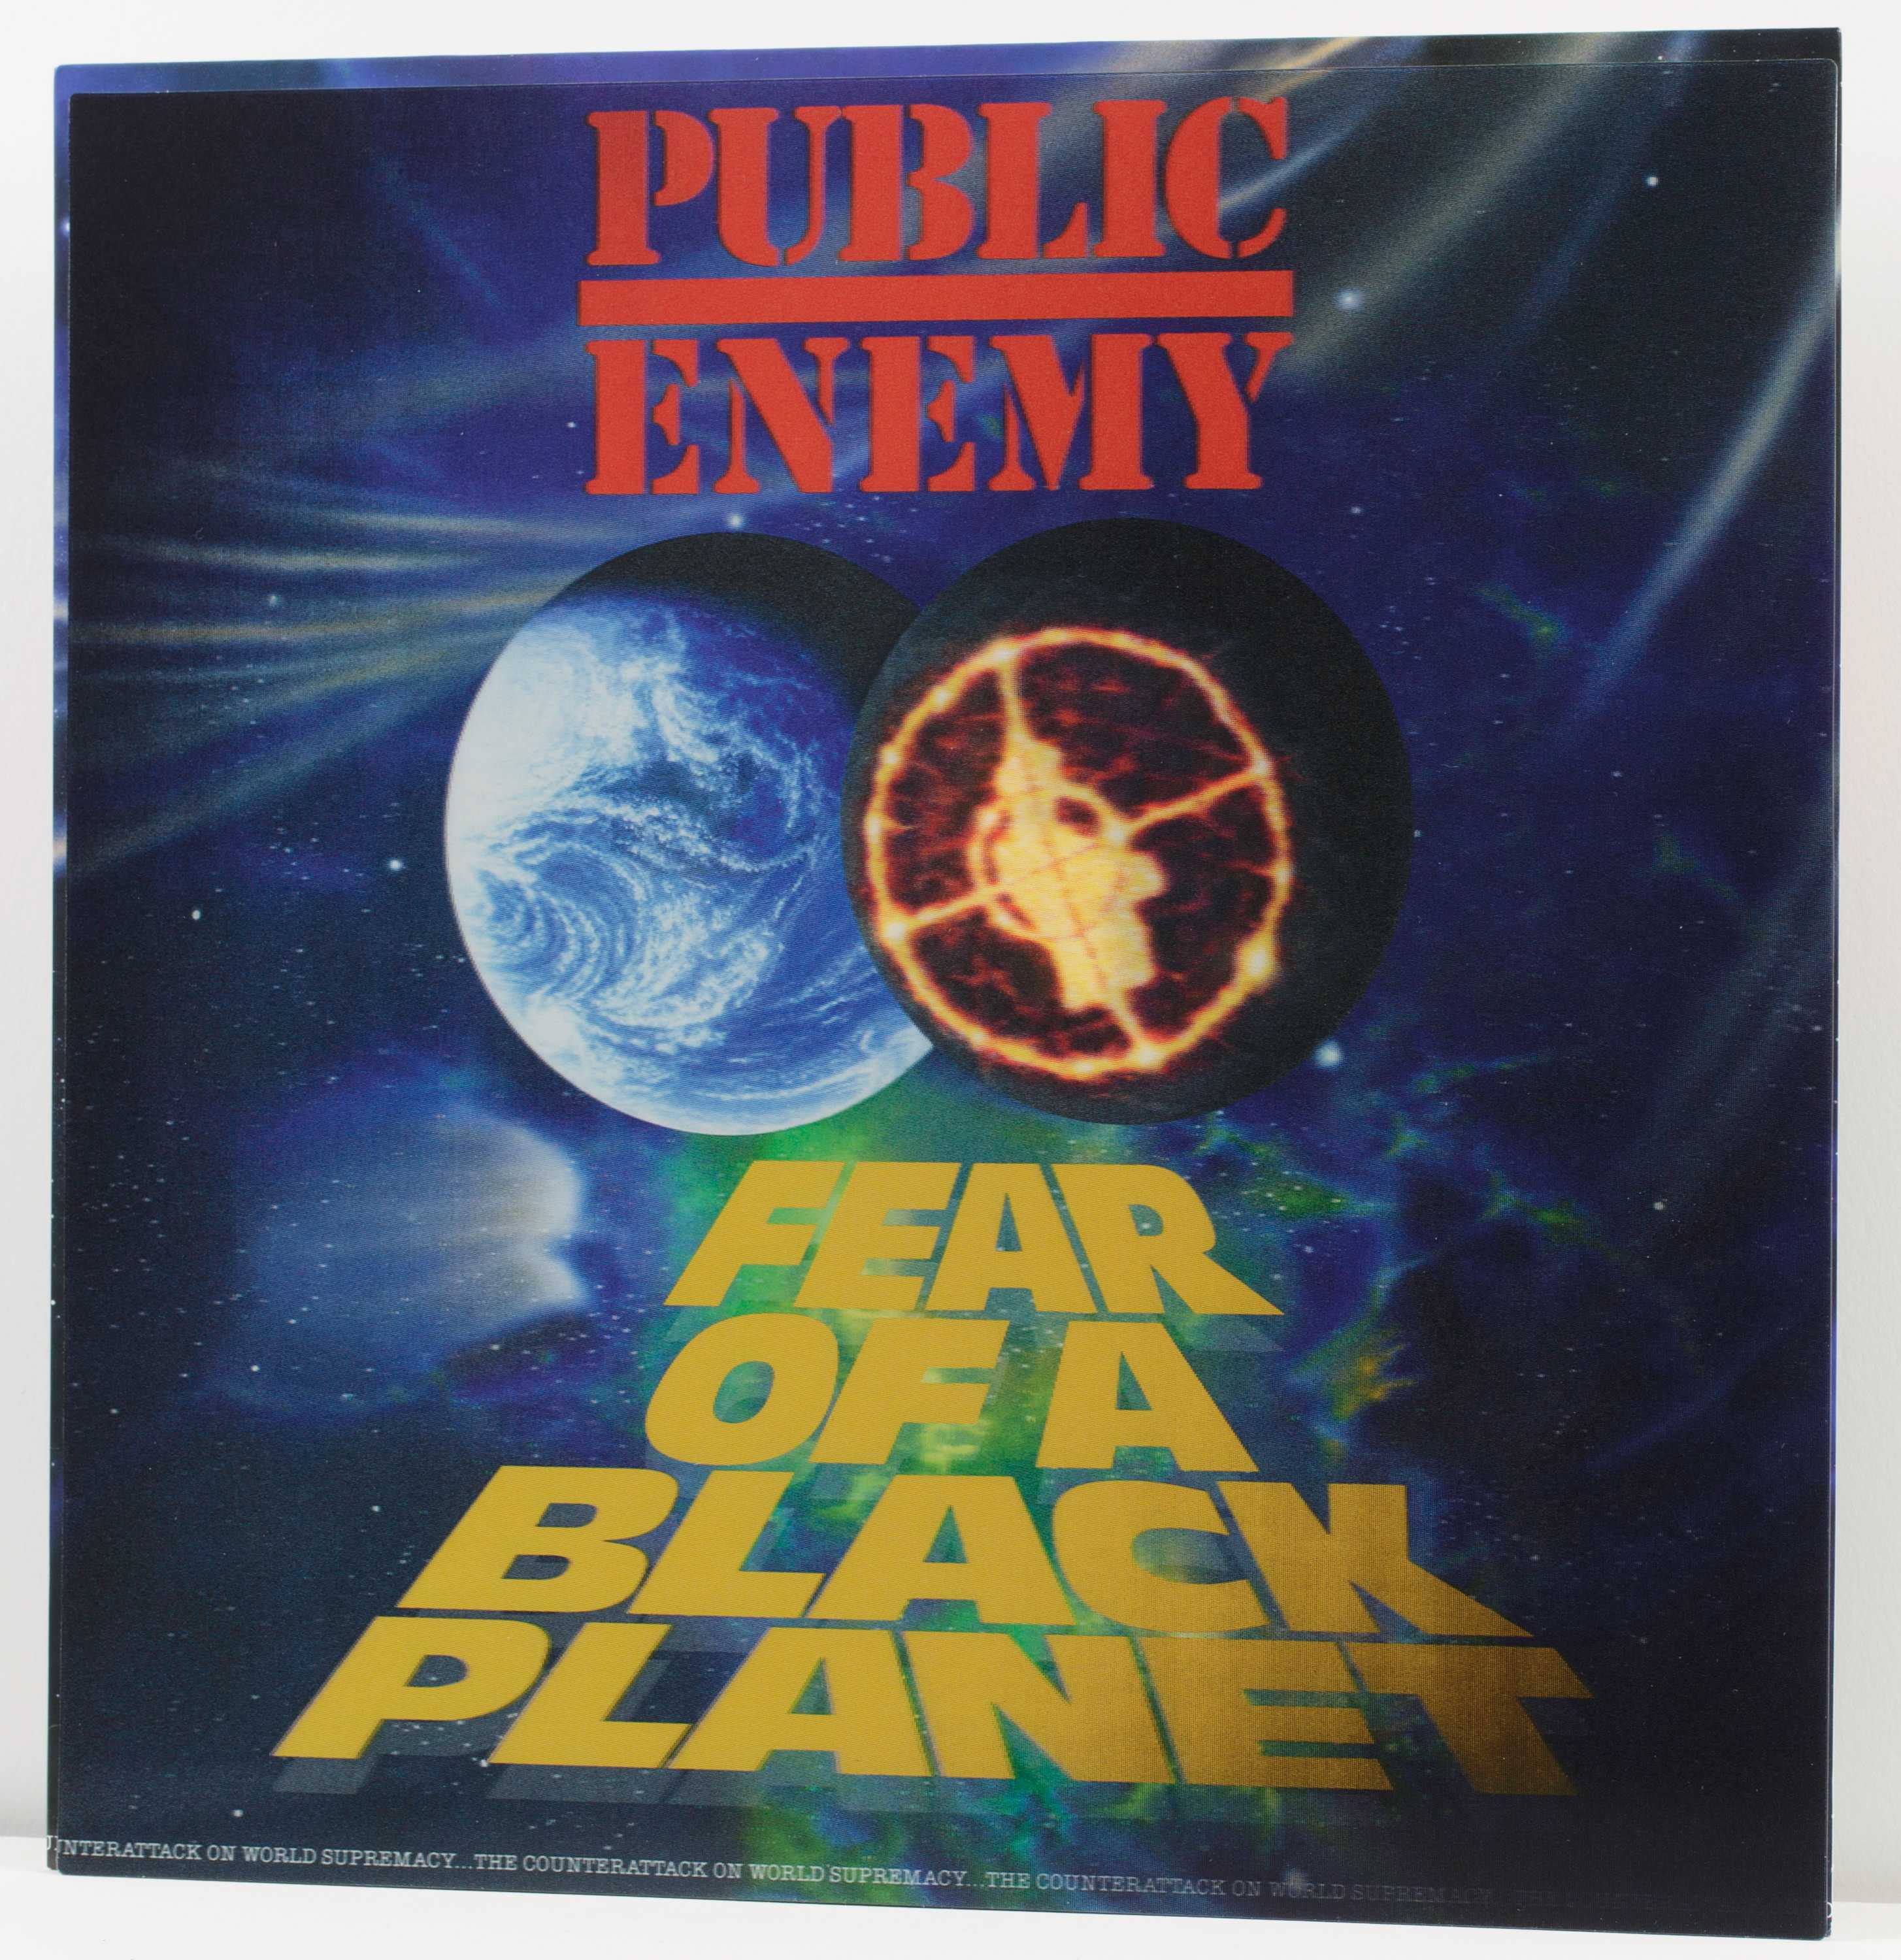 Black Planet album art has two planets colliding in space with the 'Fear of a Black Planet' in bold yellow font below.